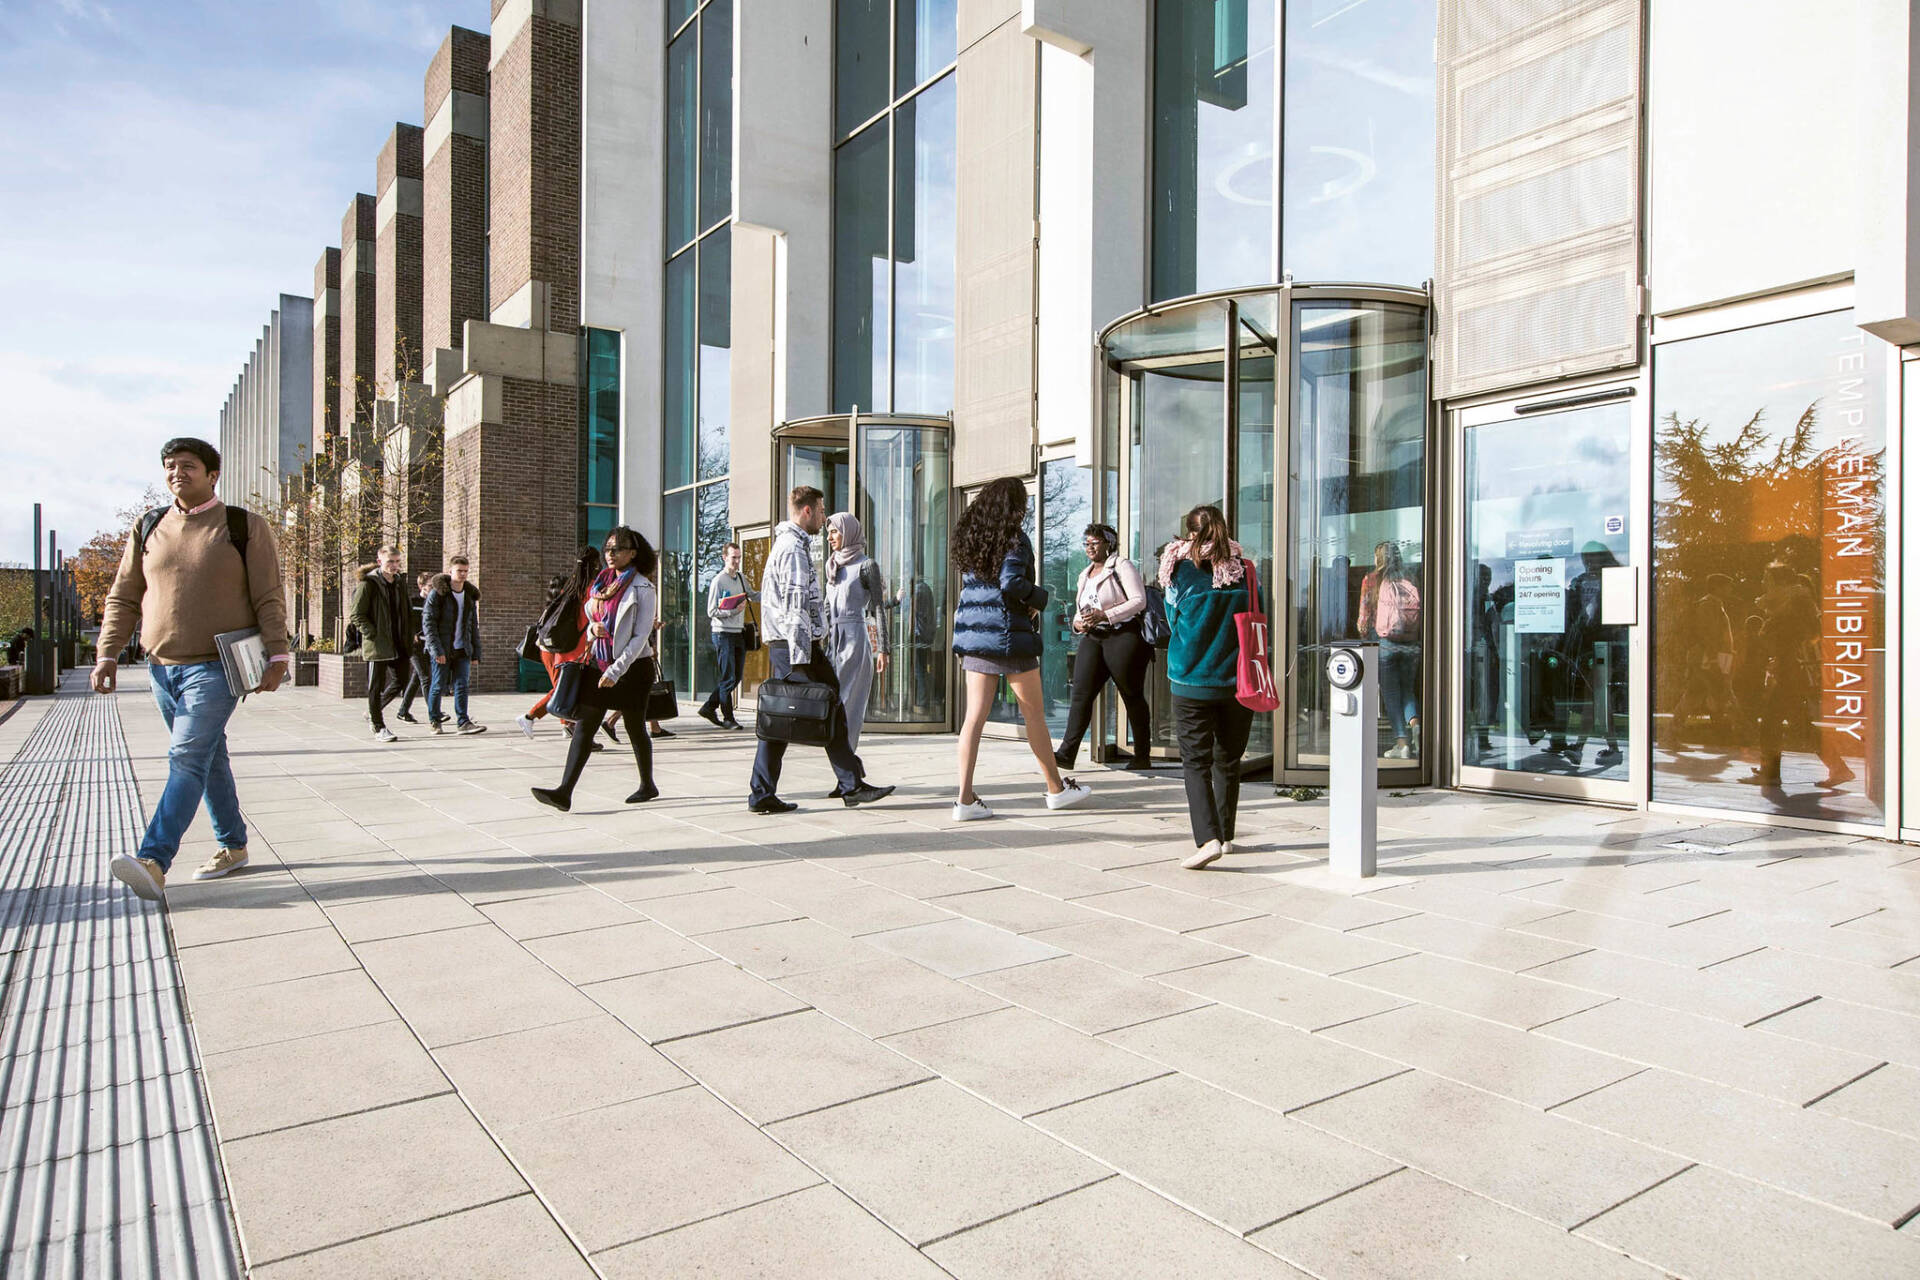 Students walking into Templeman Library